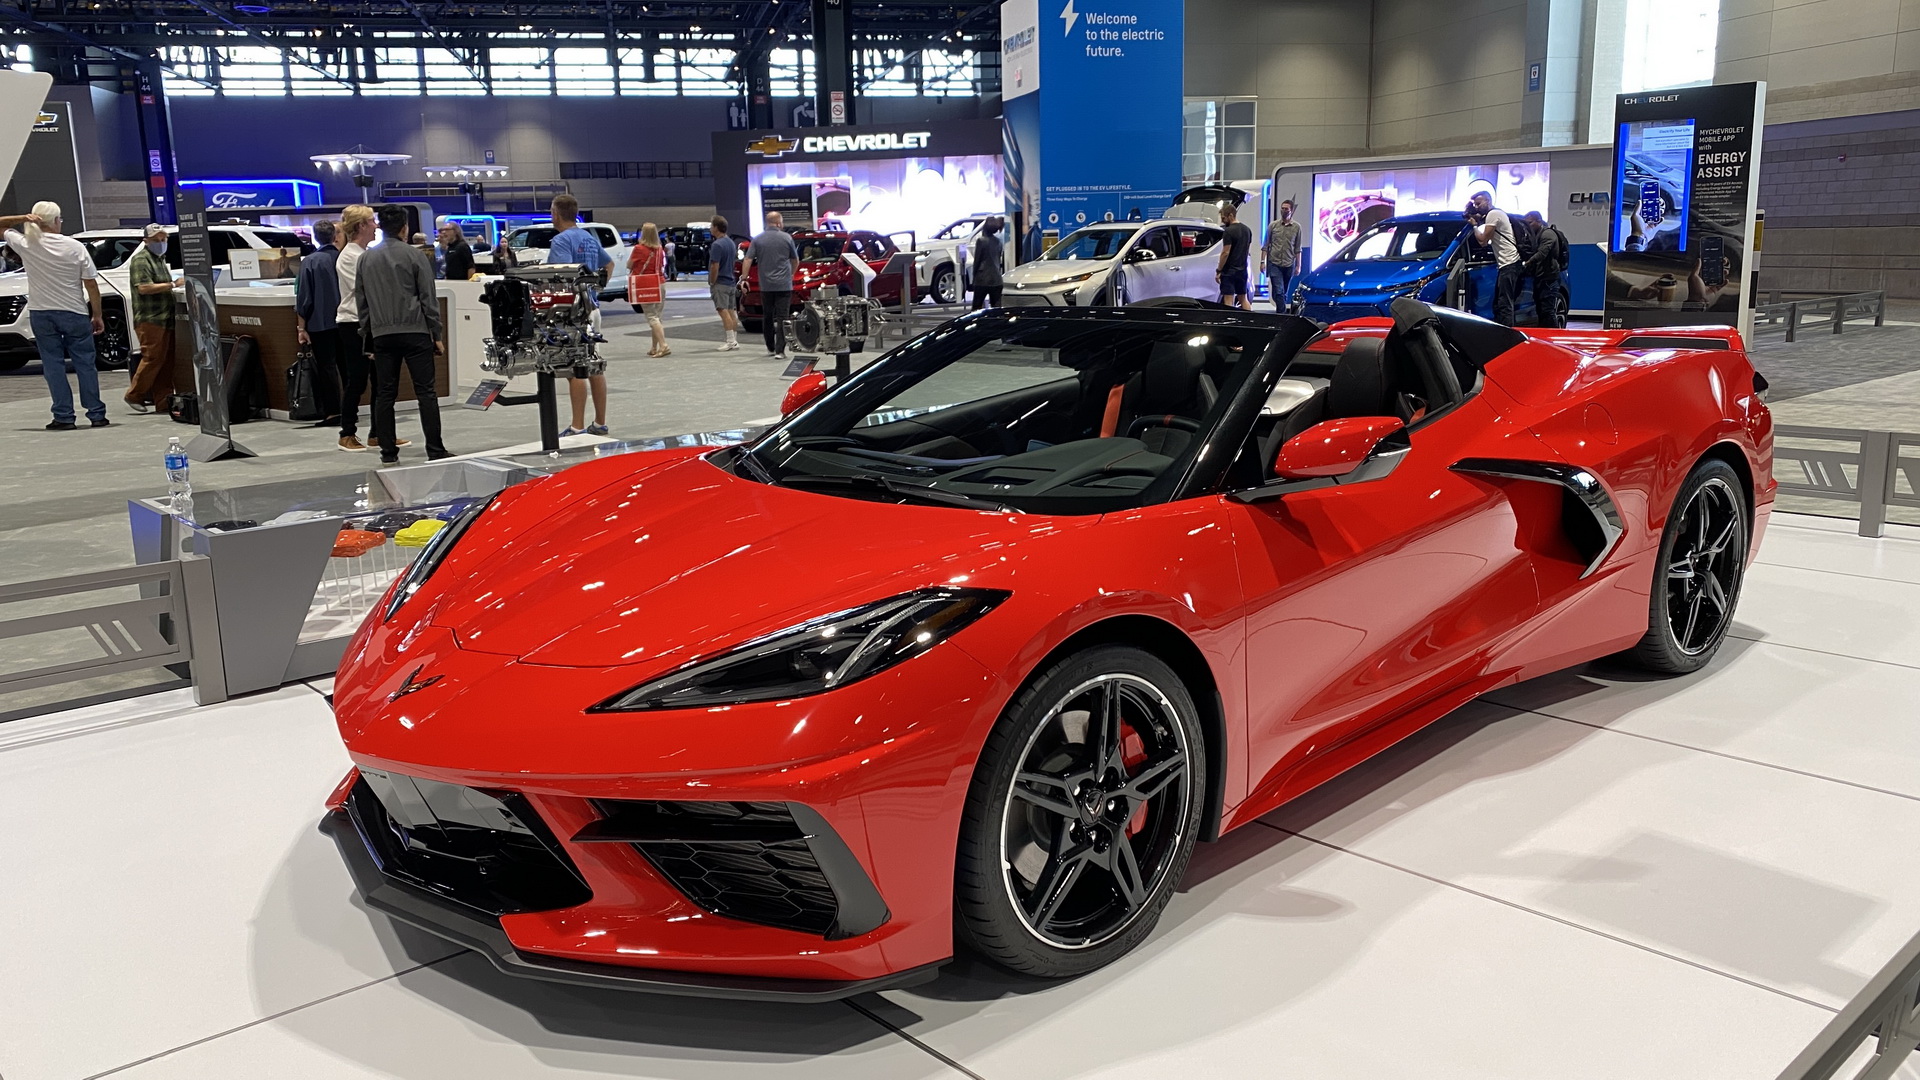 Torch Red Corvette Stingray Convertible on Display in ChiTown Looking